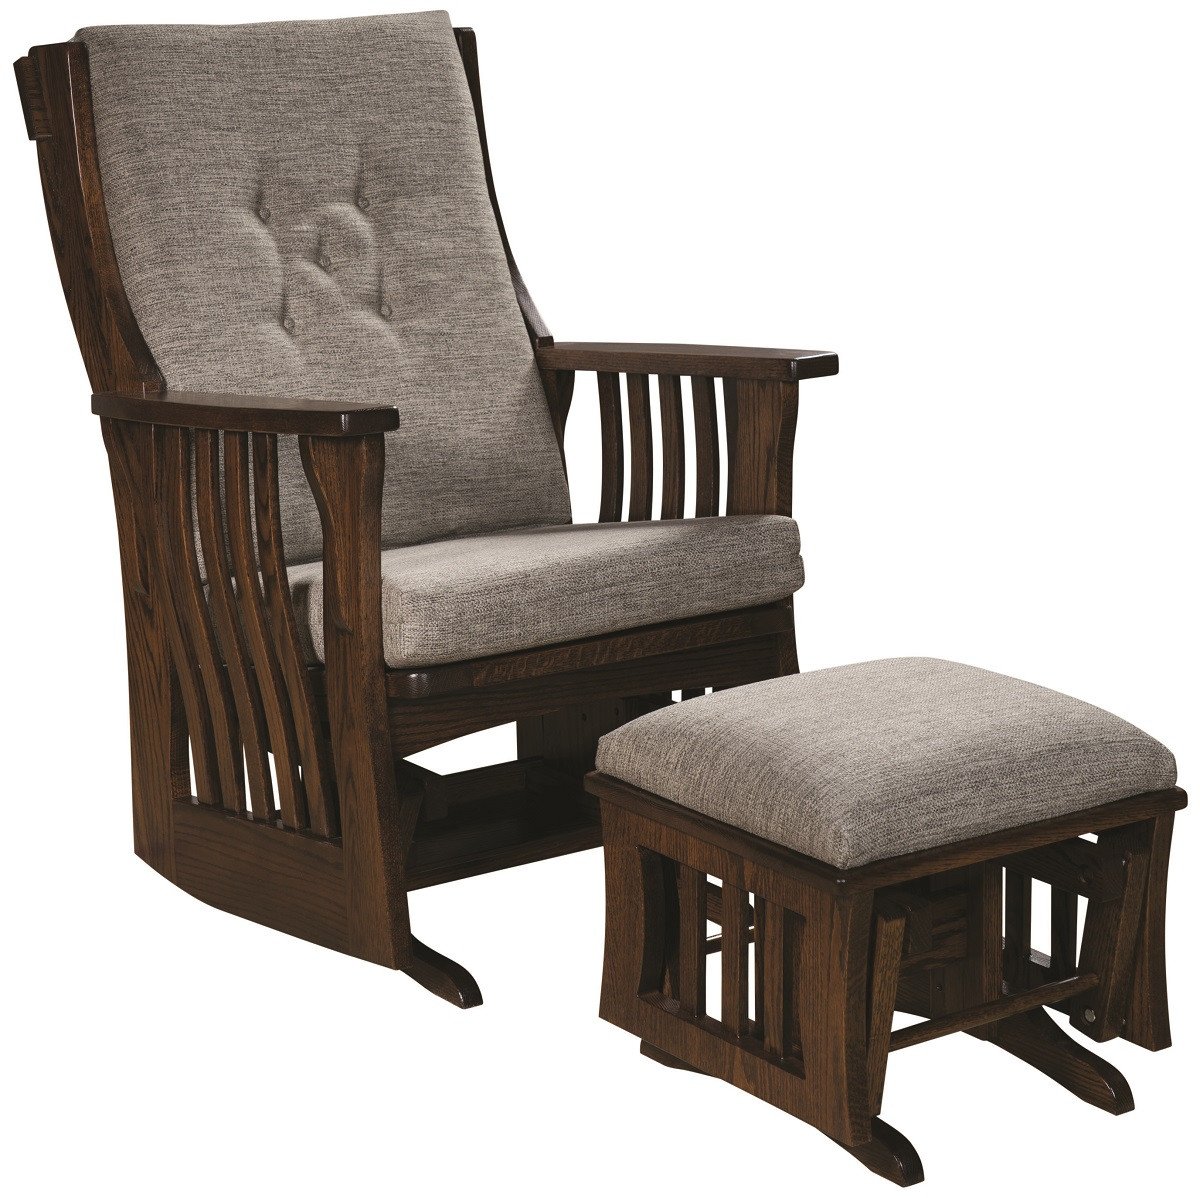 Upholstered Gliding Chair with Ottoman